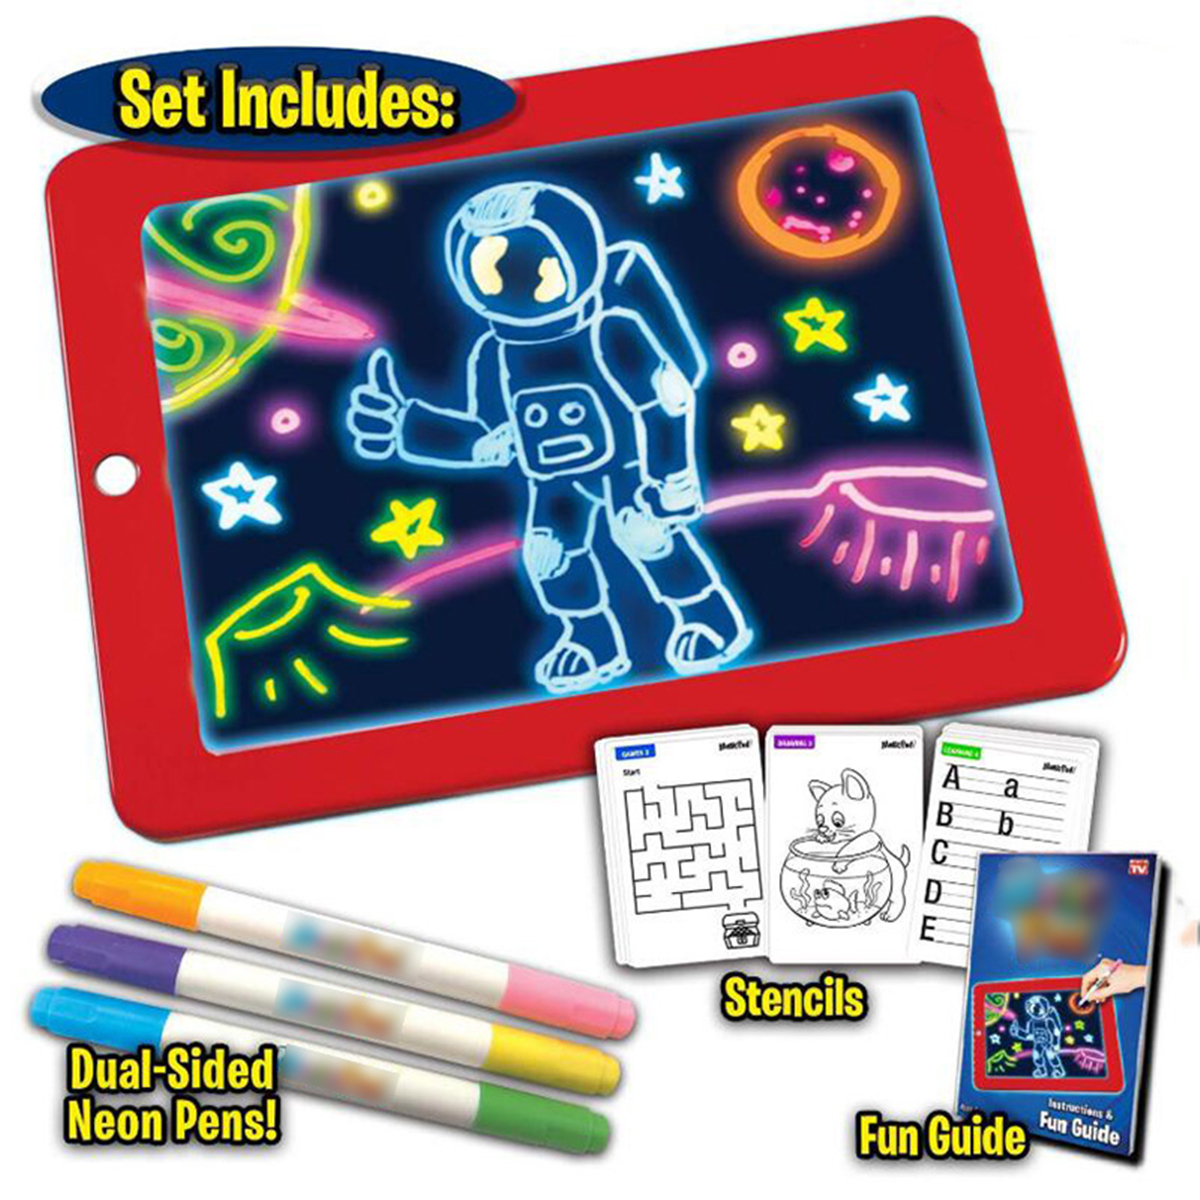 3D-Drawing-Board-LED-Writing-Tablet-Board-For-Plastic-Creative-Art-With-Pen-Brush-Children-Clipboard-1560212-3